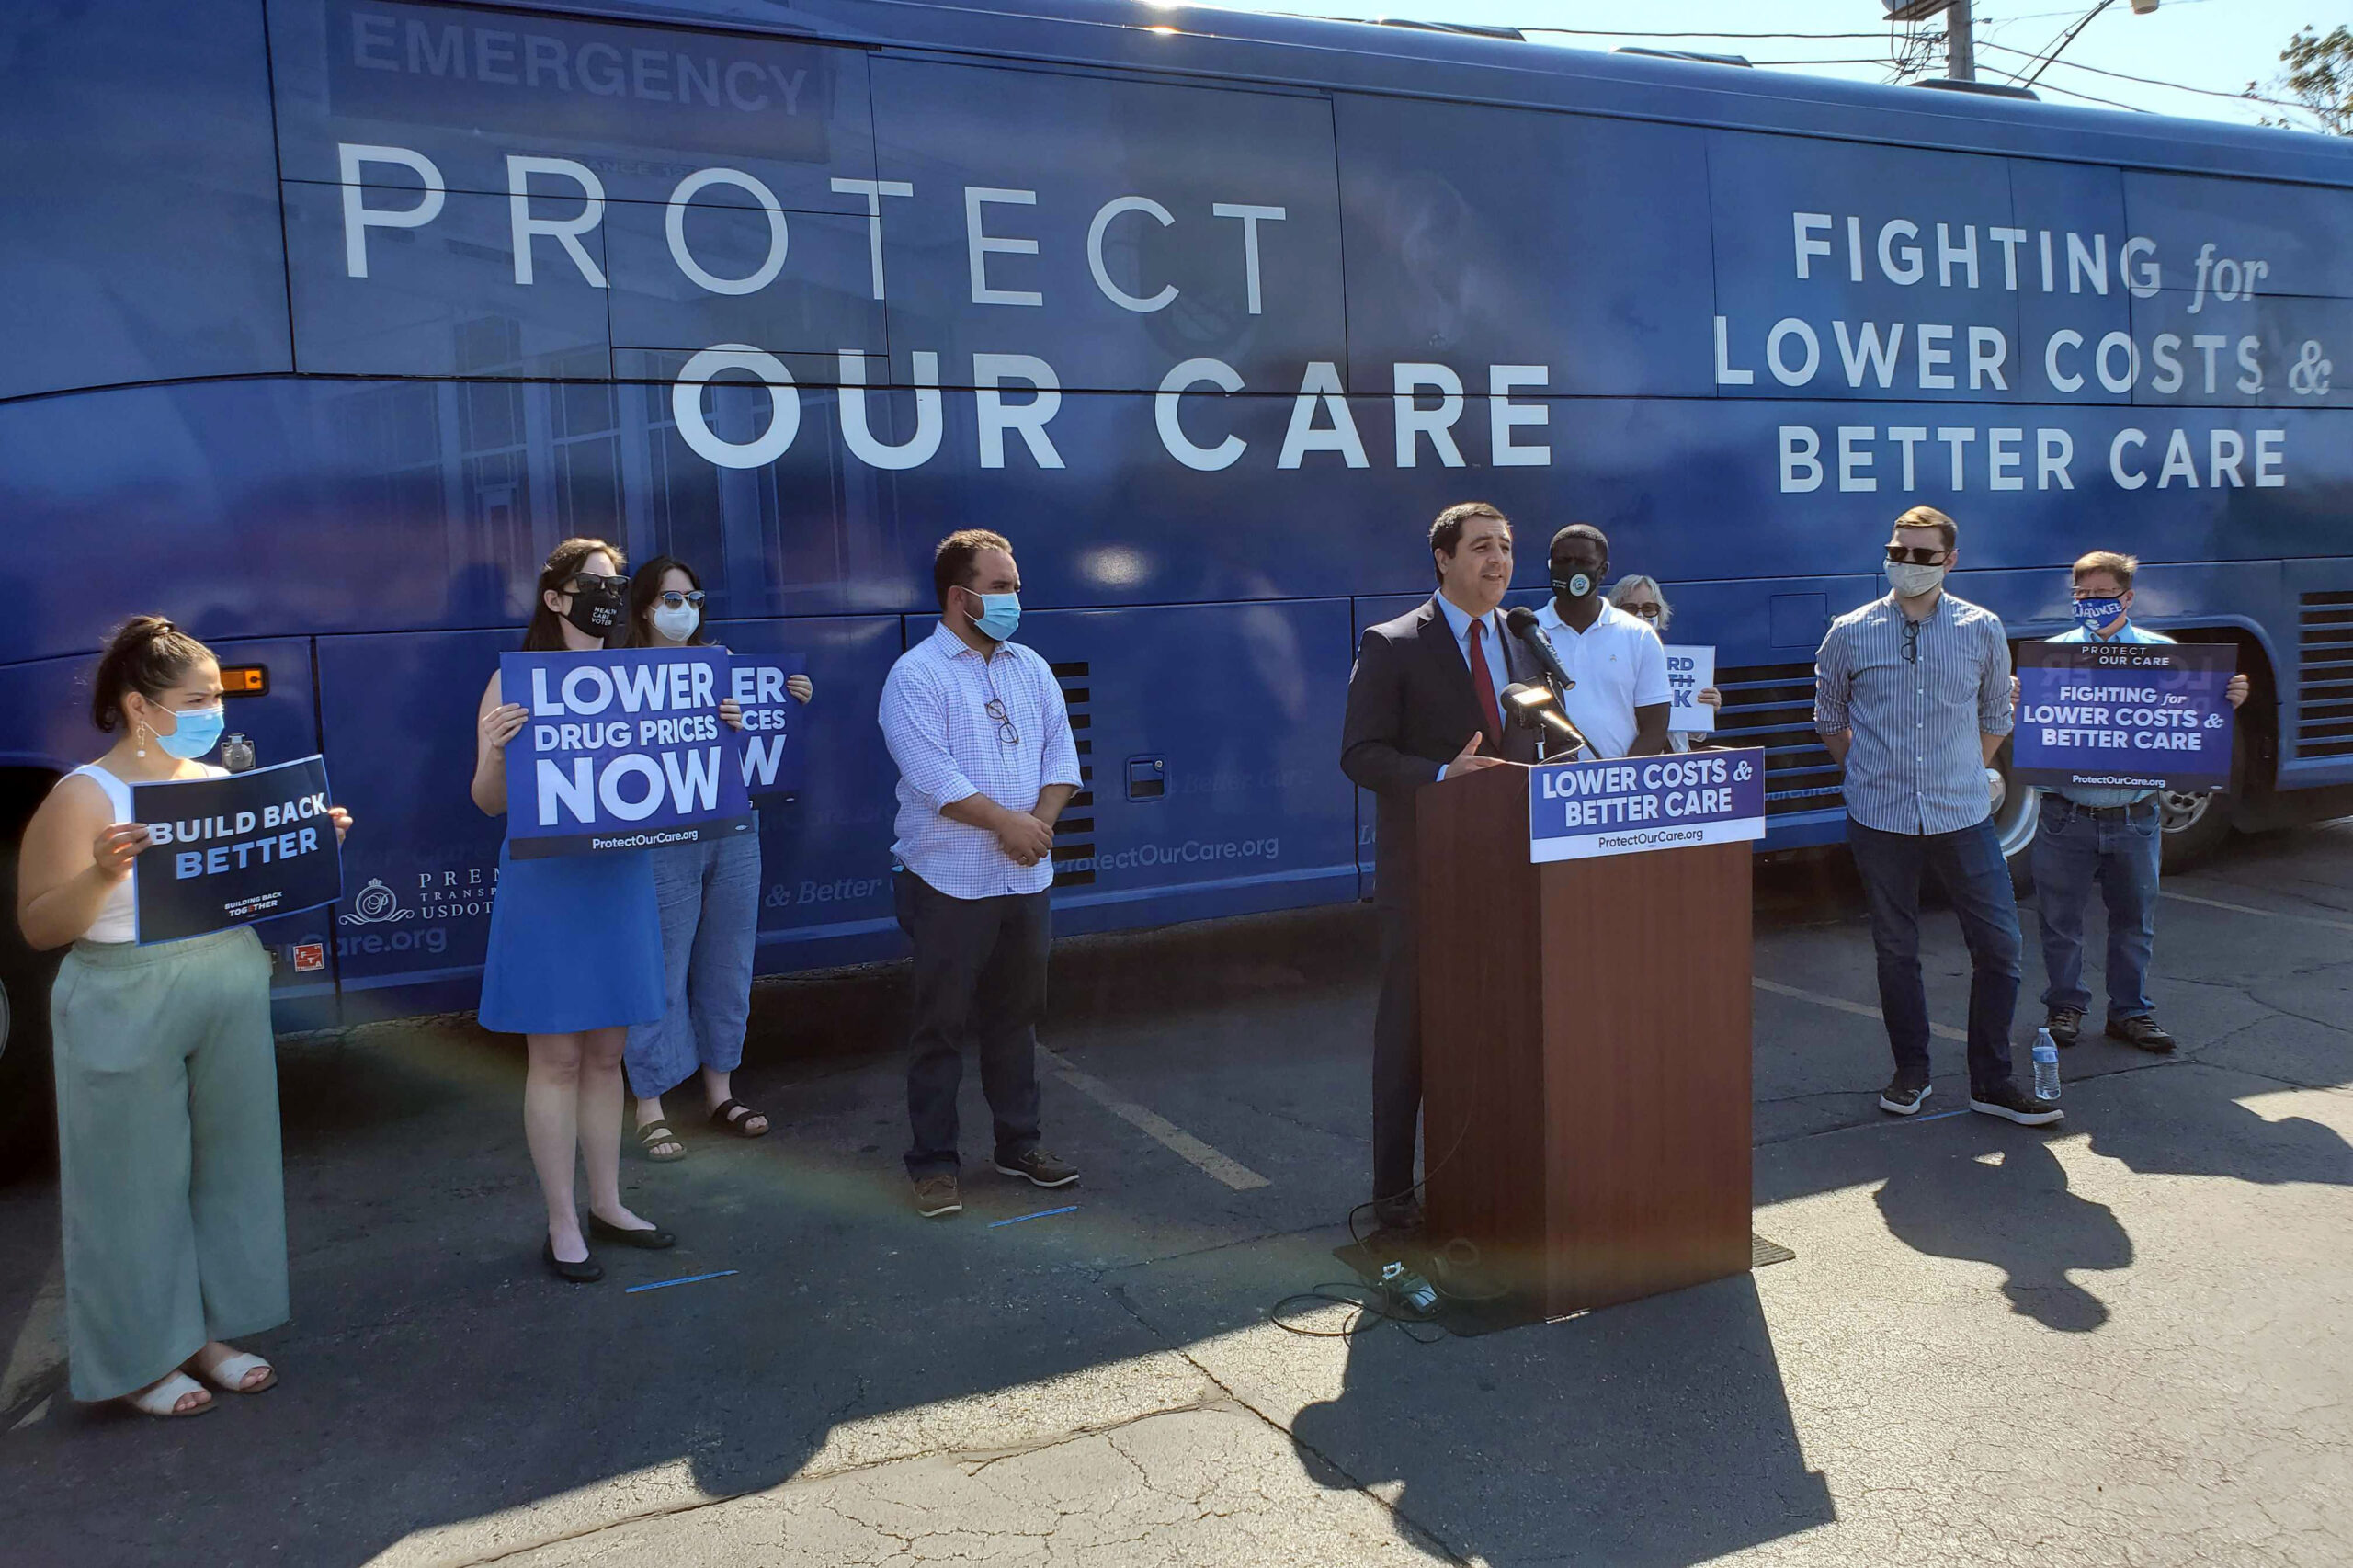 Josh Kaul speaks at an event calling for lower health care costs